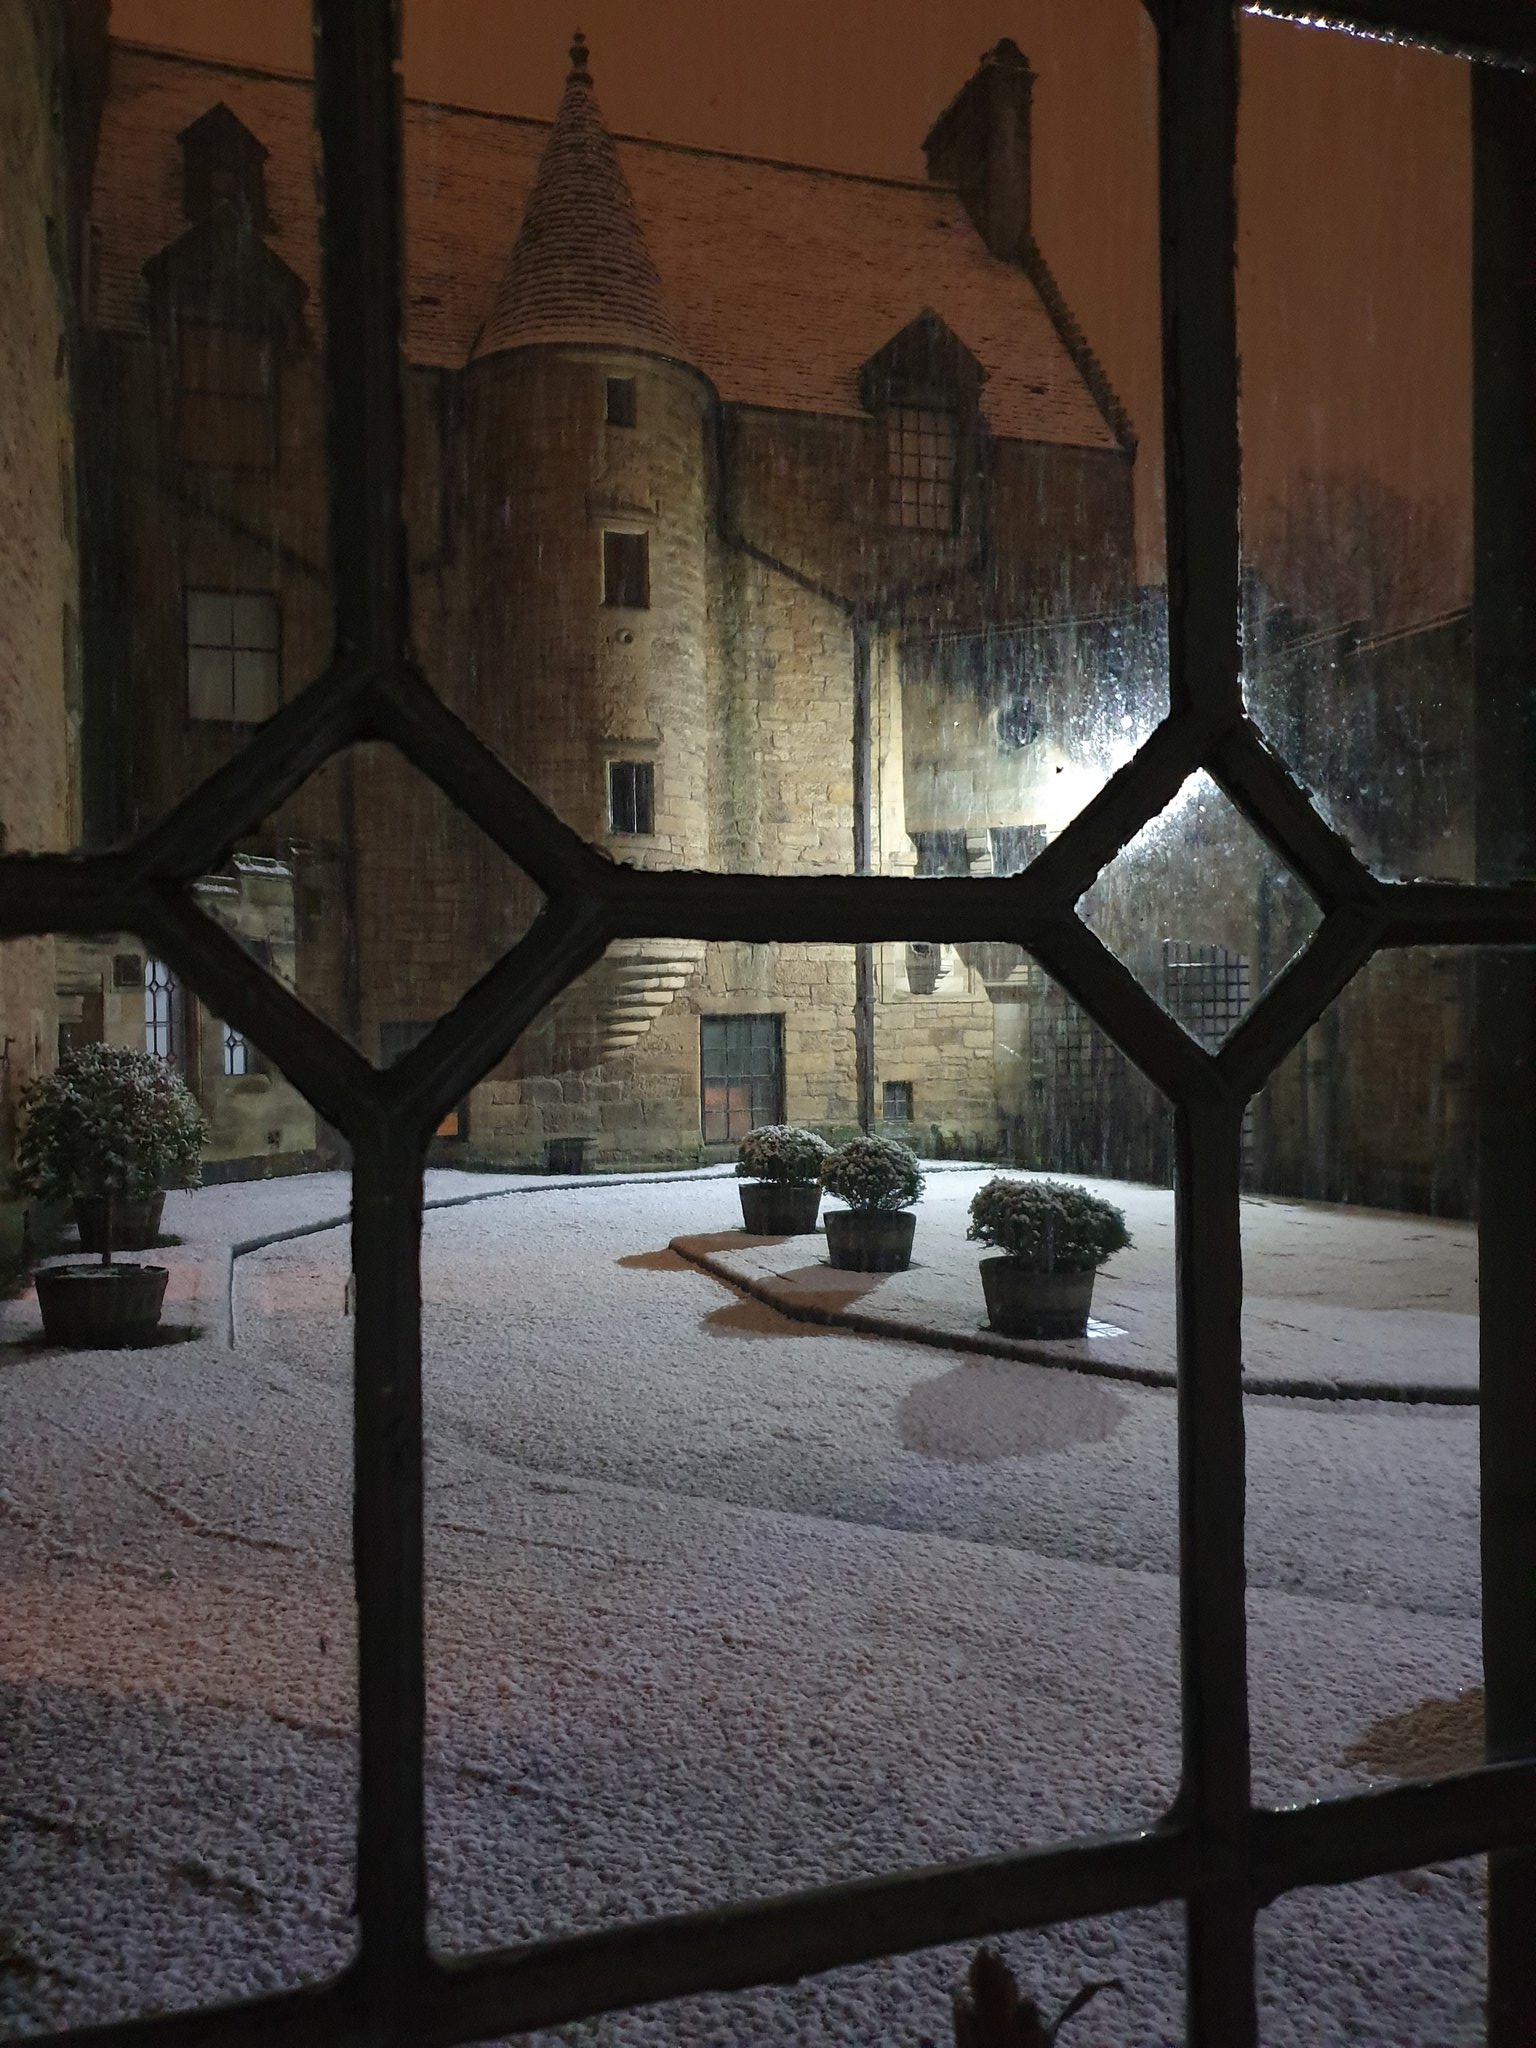 A snowy Monday night in Motherwell by Shelley C.